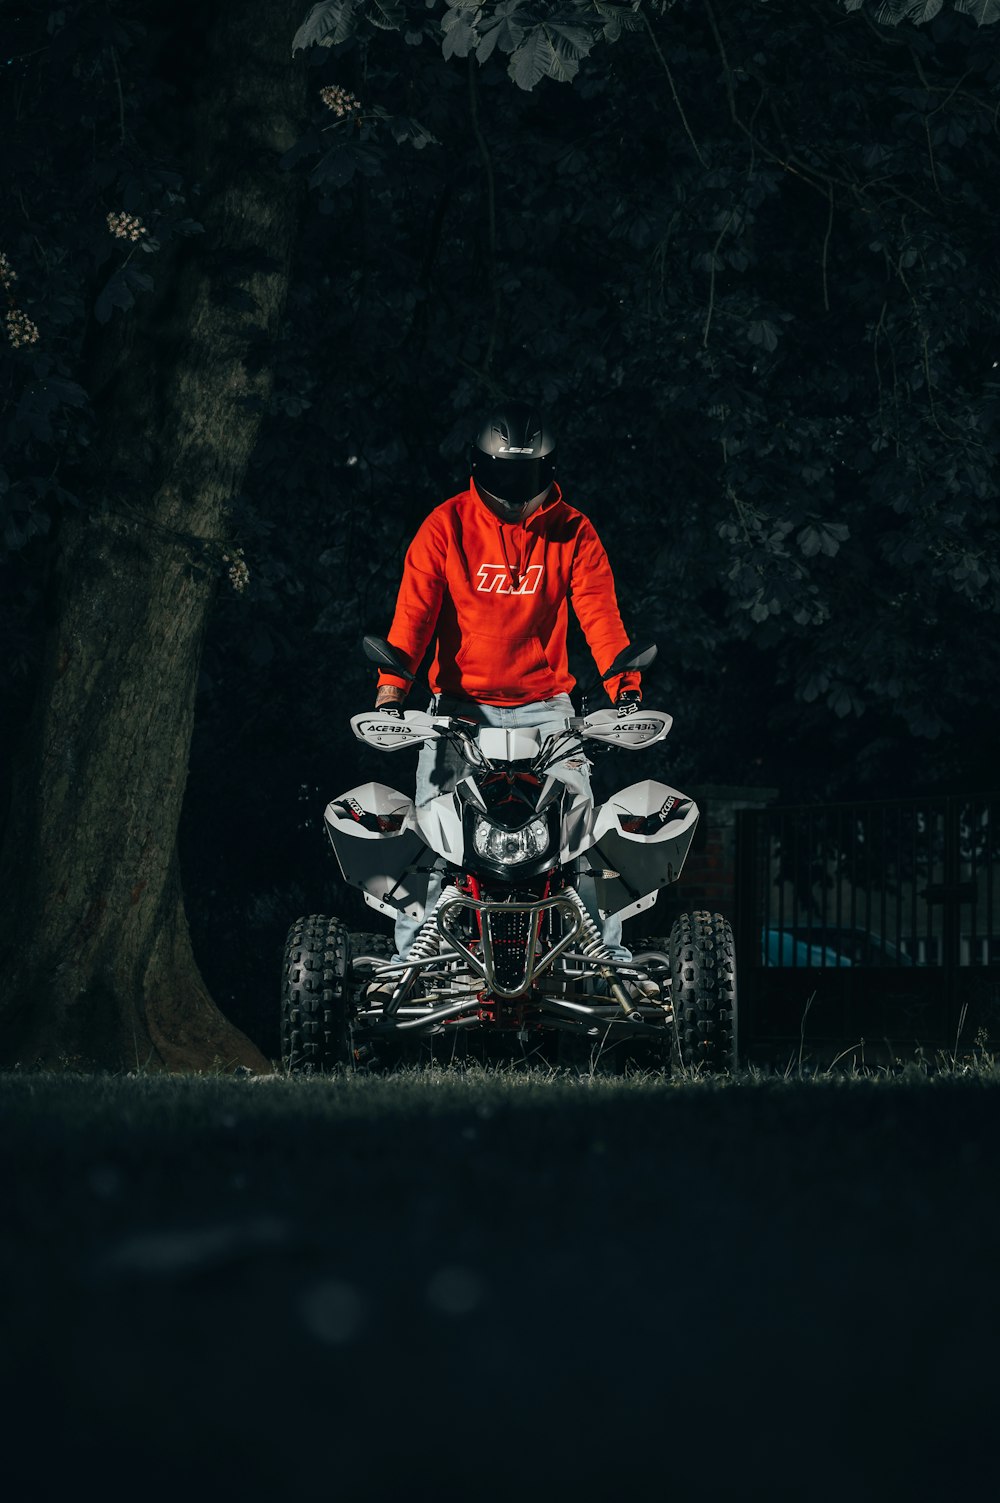 man in red jacket riding on white and black motorcycle